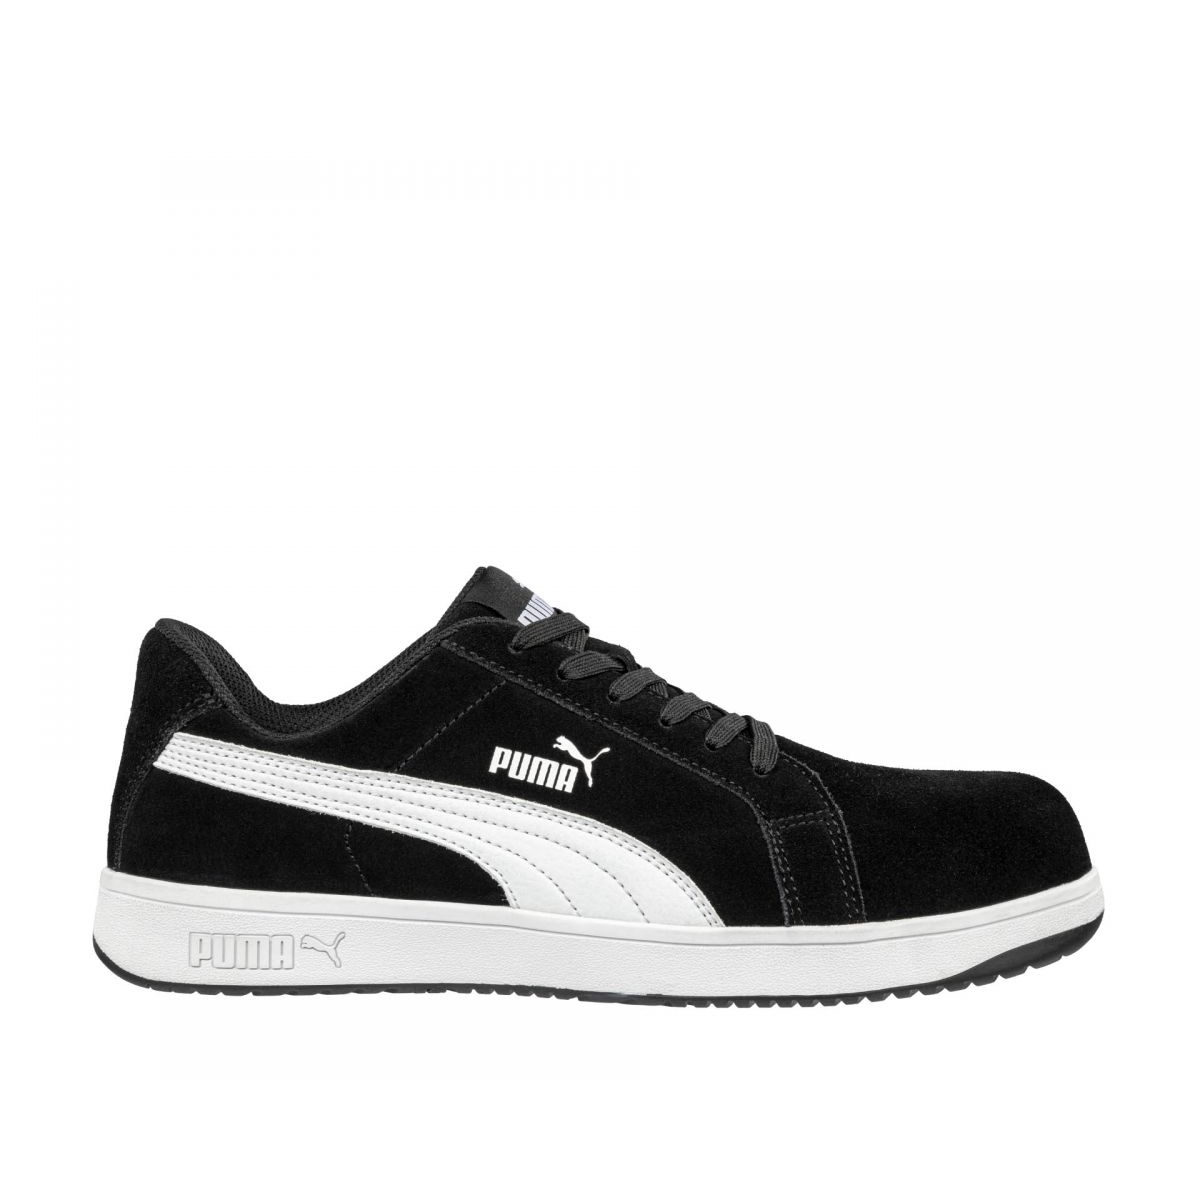 PUMA Safety Women's Iconic Low Composite Toe EH Work Shoes Black Suede - 640115 BLACK - BLACK, 10